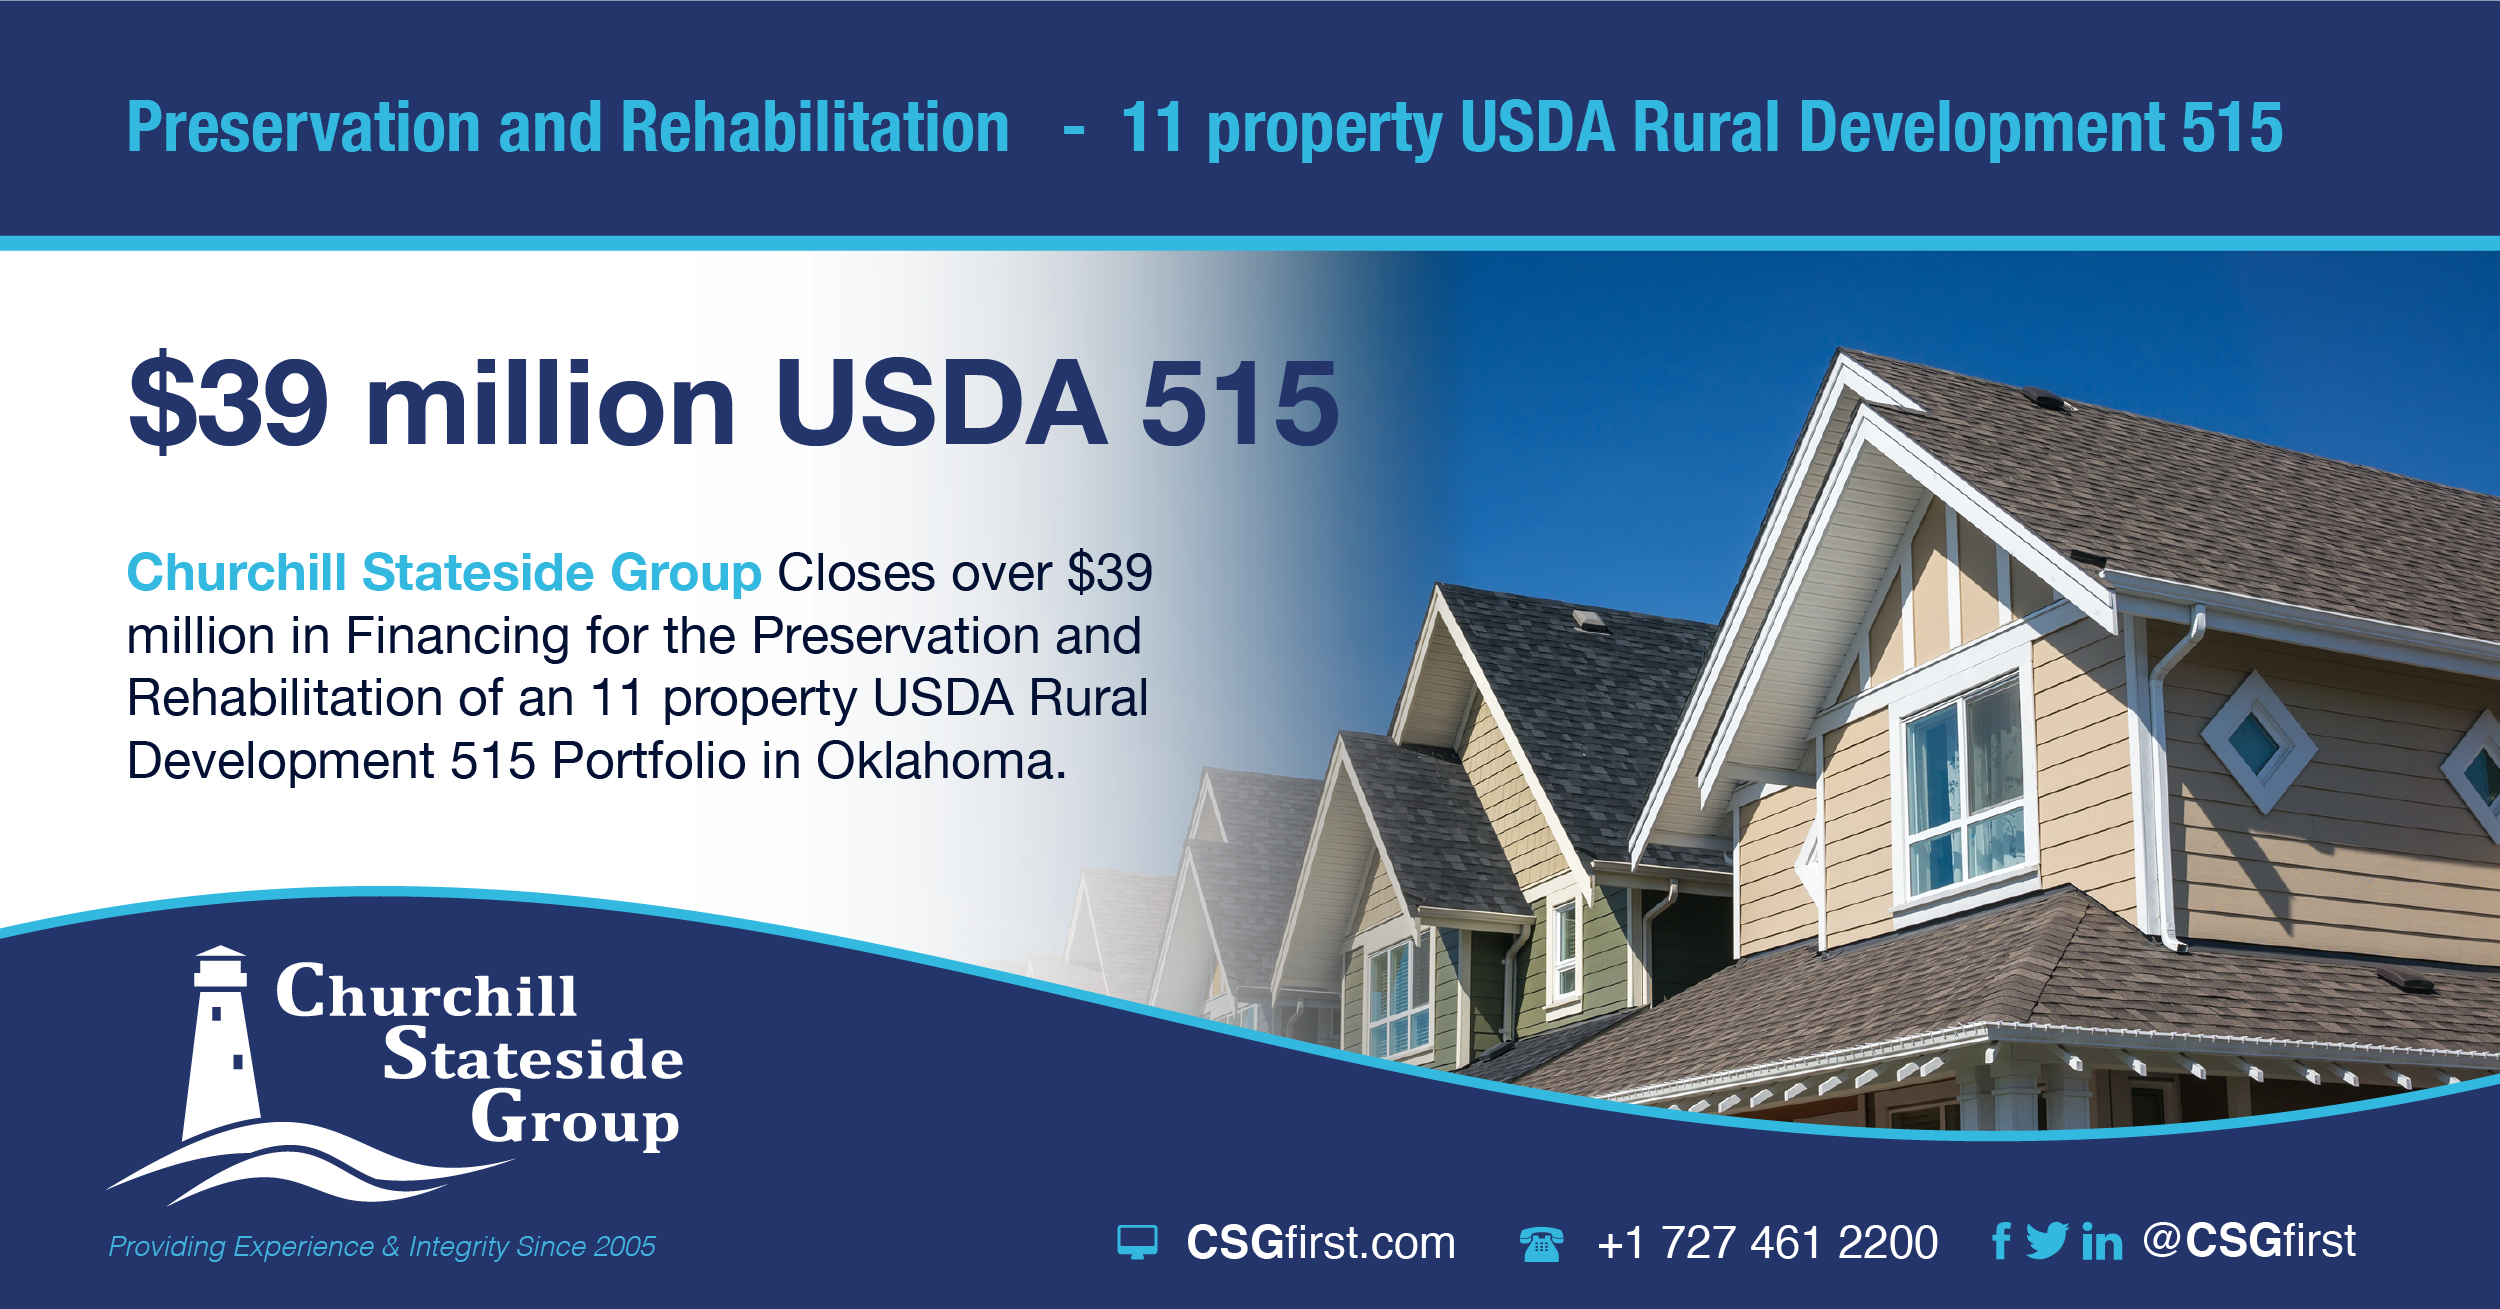 Churchill Stateside Group Closes over $39 million in Financing for the Preservation and Rehabilitation of an 11 property USDA Rural Development 515 Portfolio in Oklahoma